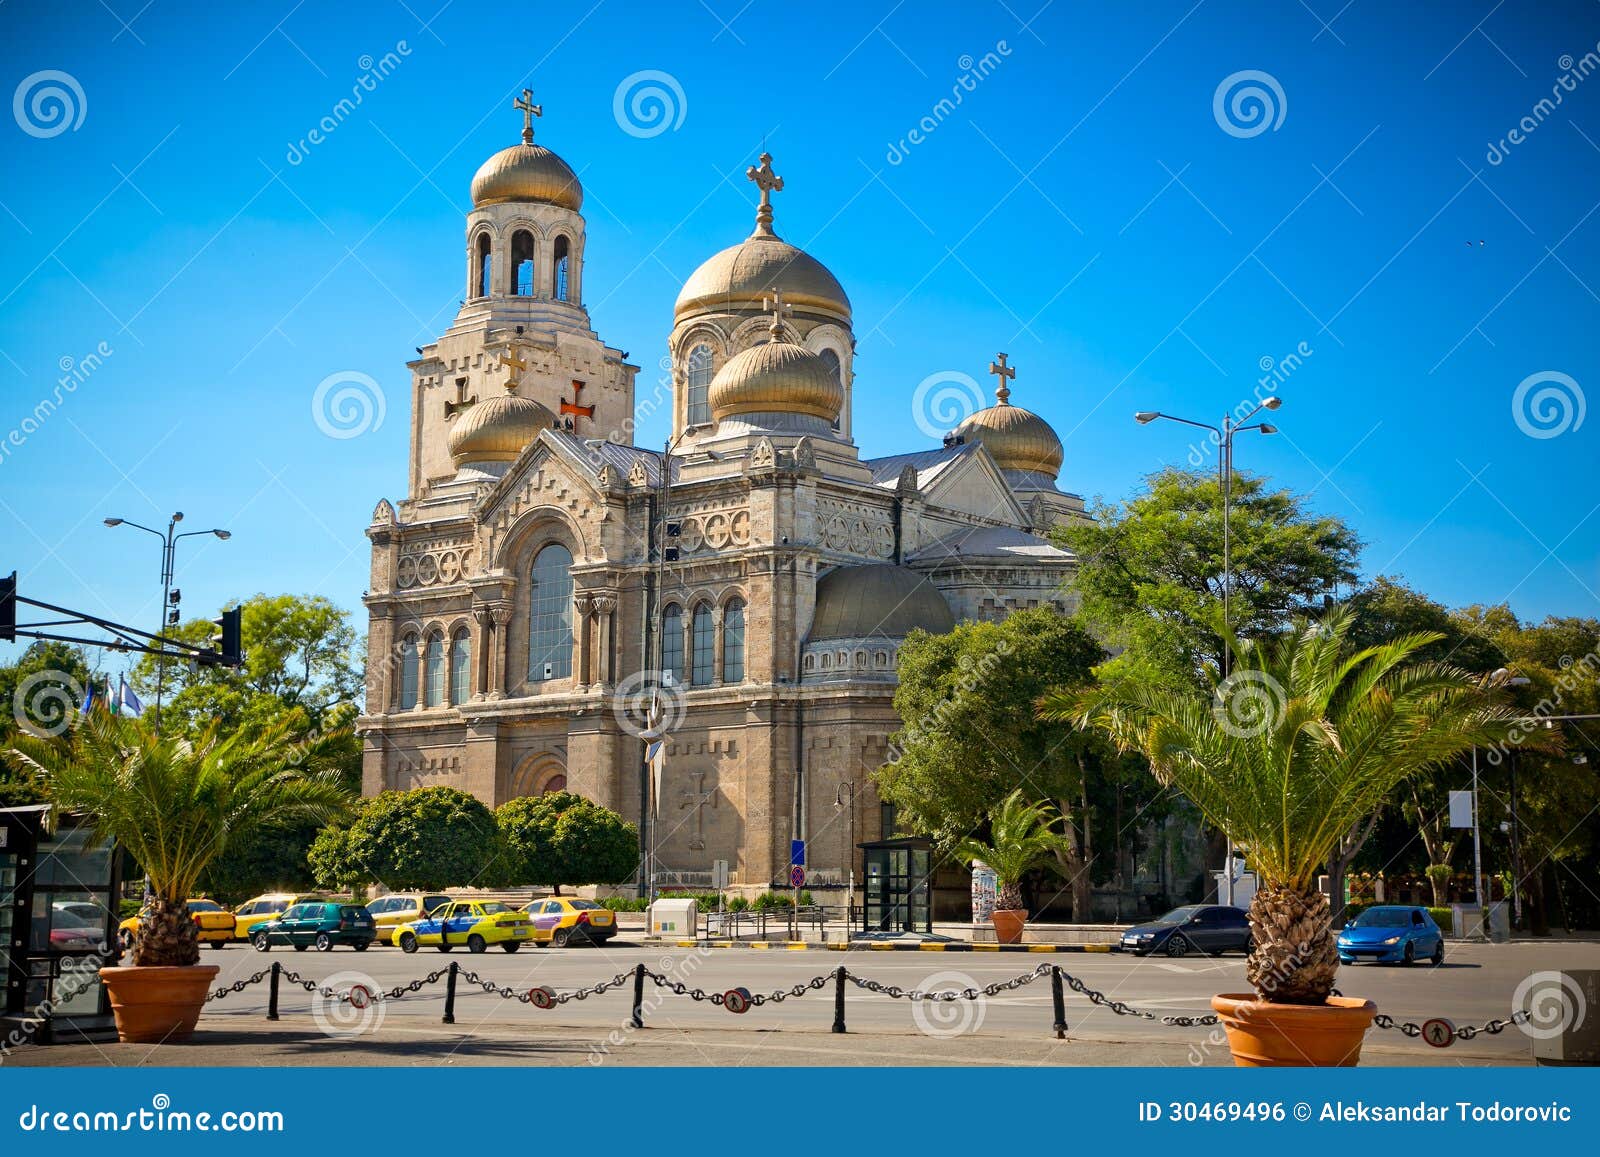 the cathedral of the assumption in varna, bulgaria.